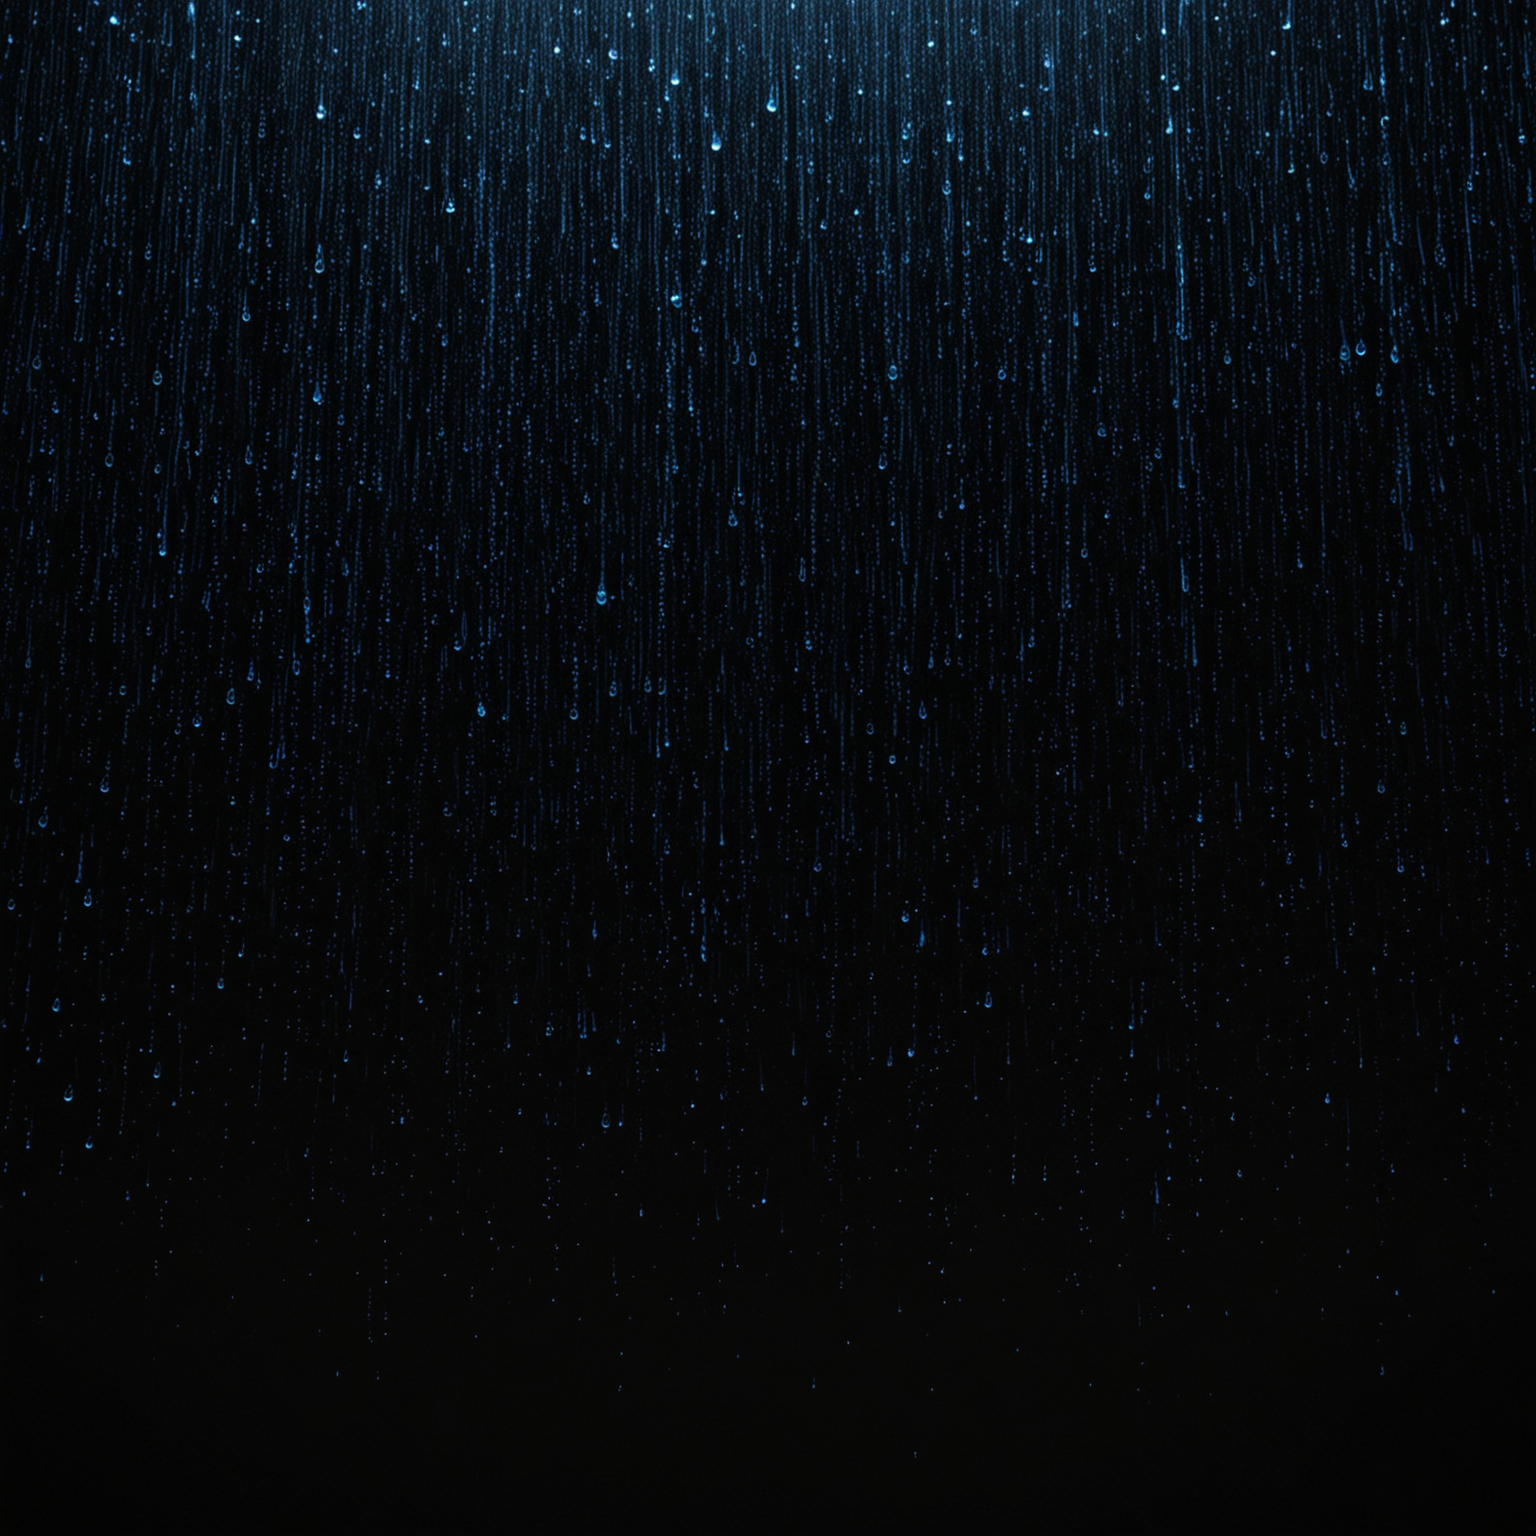 Blue Rain Falling Abstract Artistic Illustration of Falling Raindrops on a Dark Background